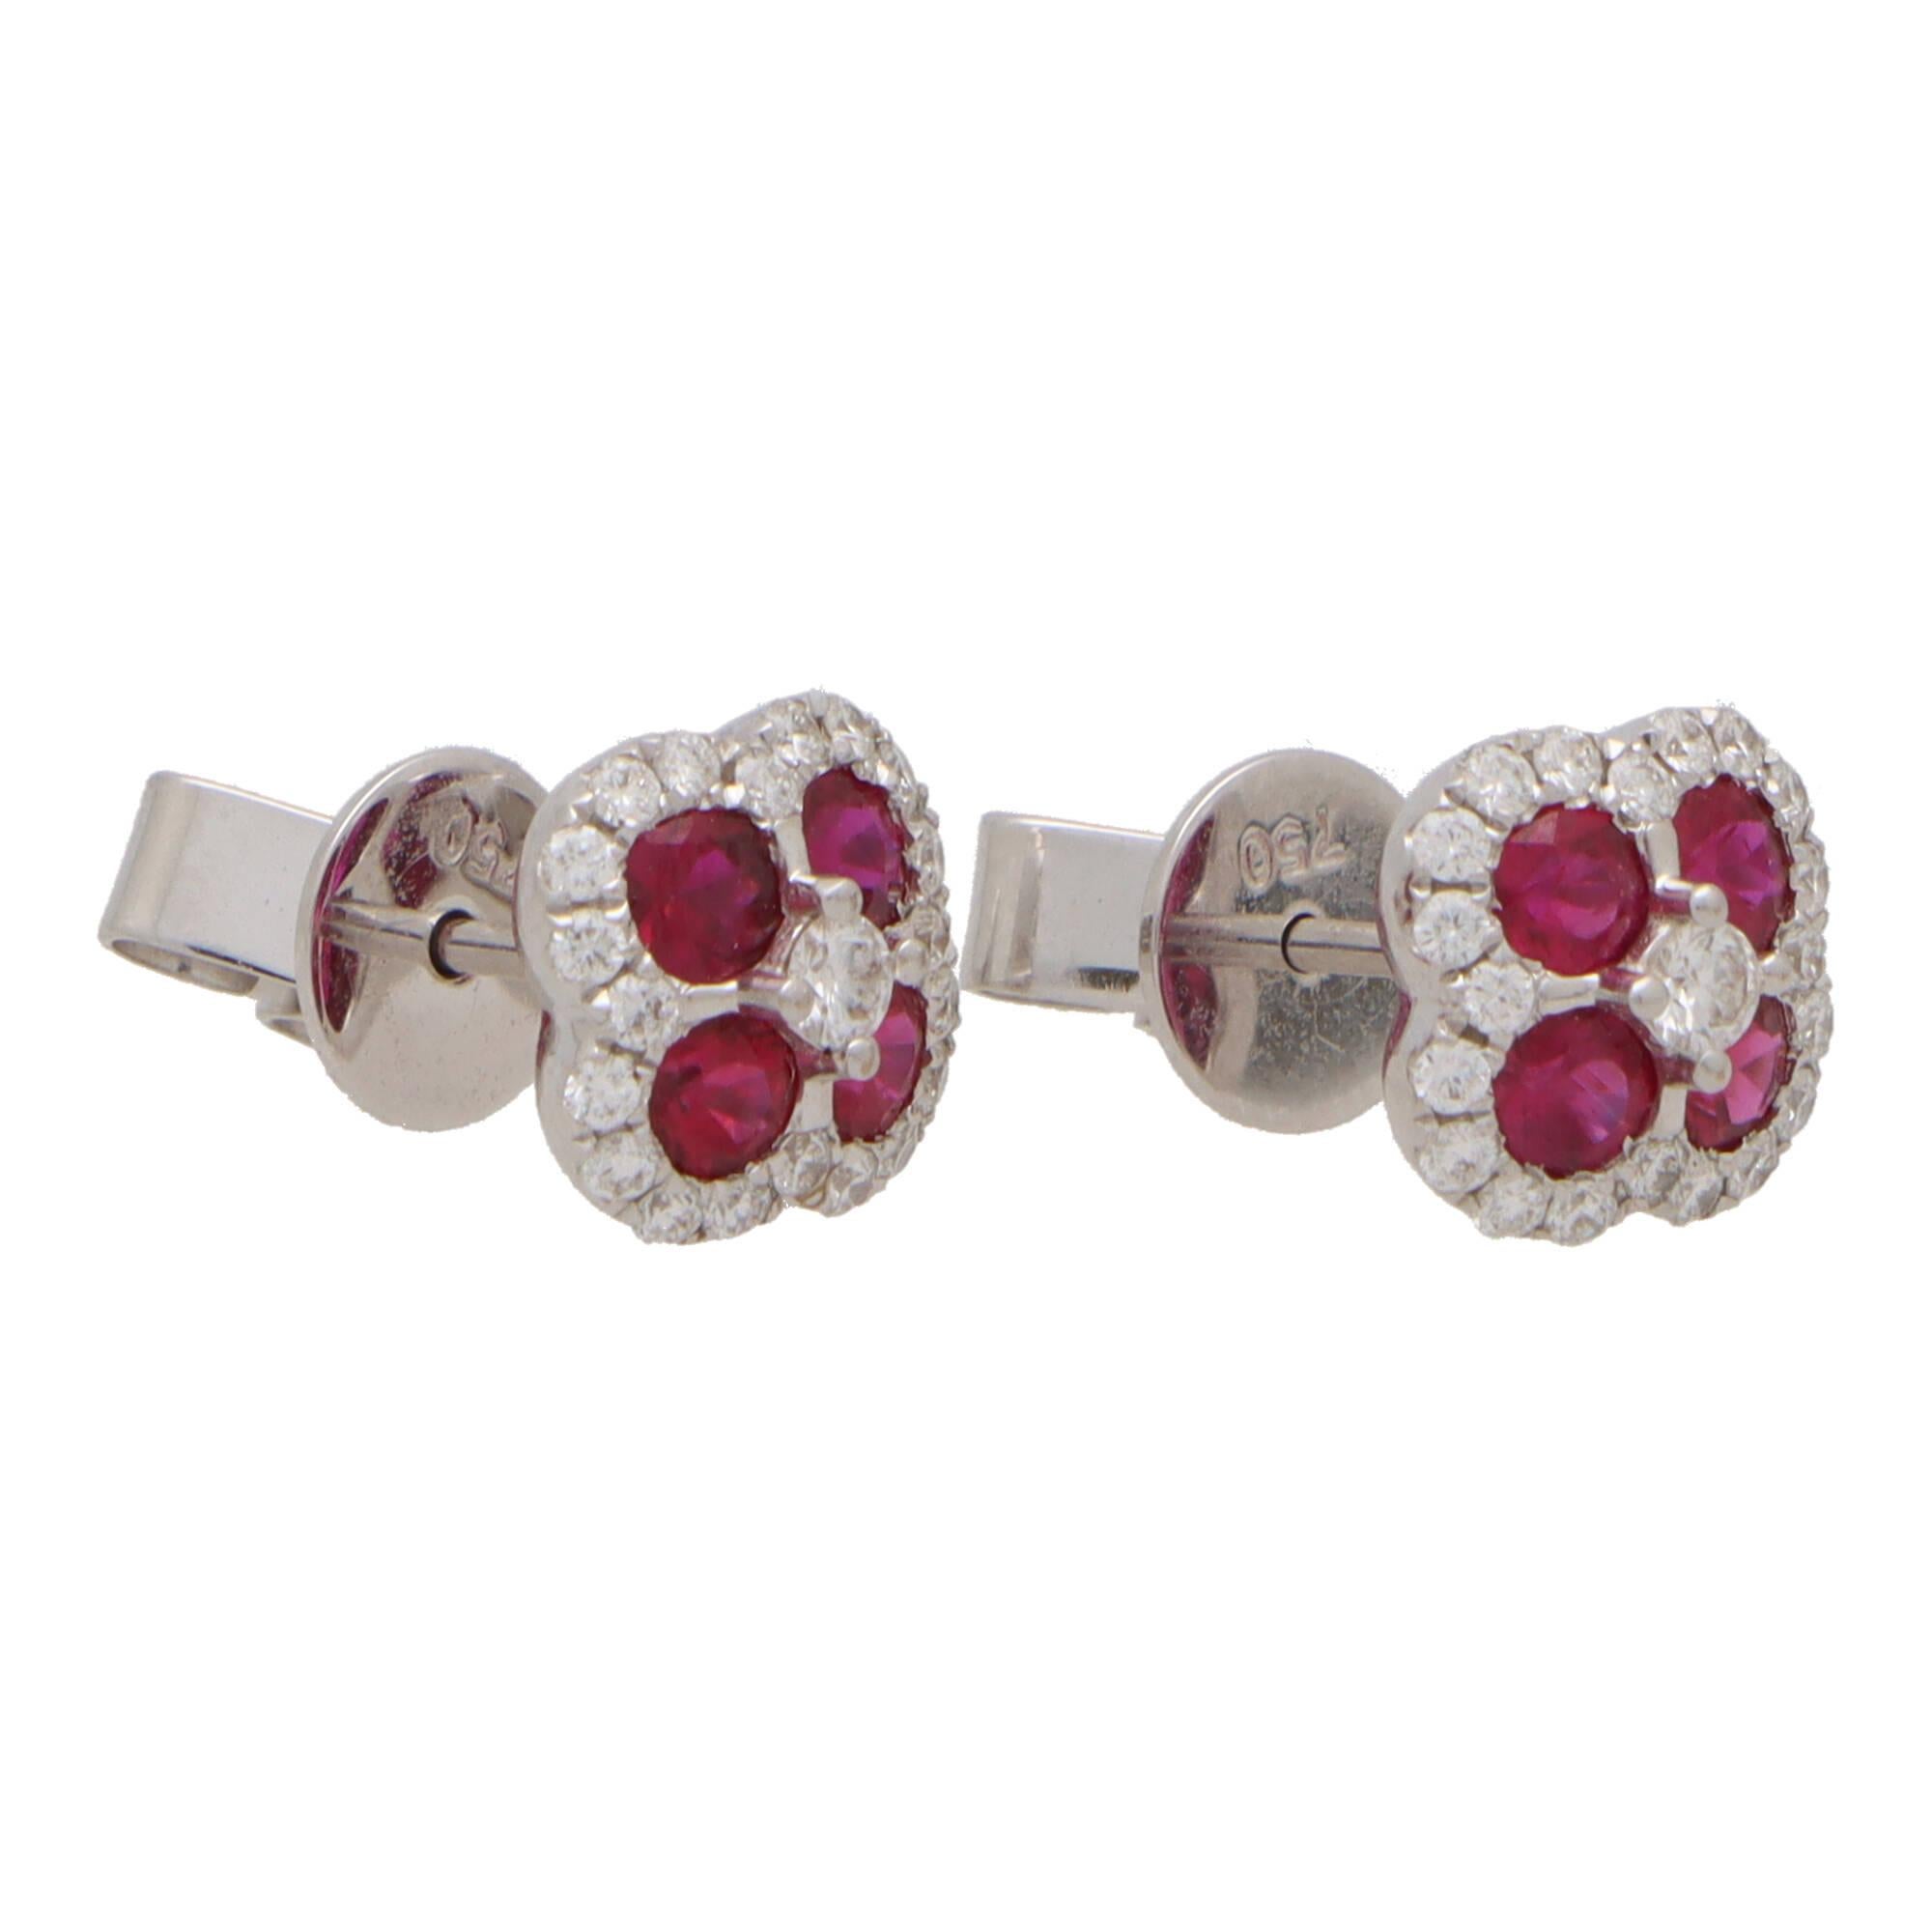 Ruby and Diamond Haloed Floral Cluster Earrings Set in 18k White Gold In Excellent Condition For Sale In London, GB